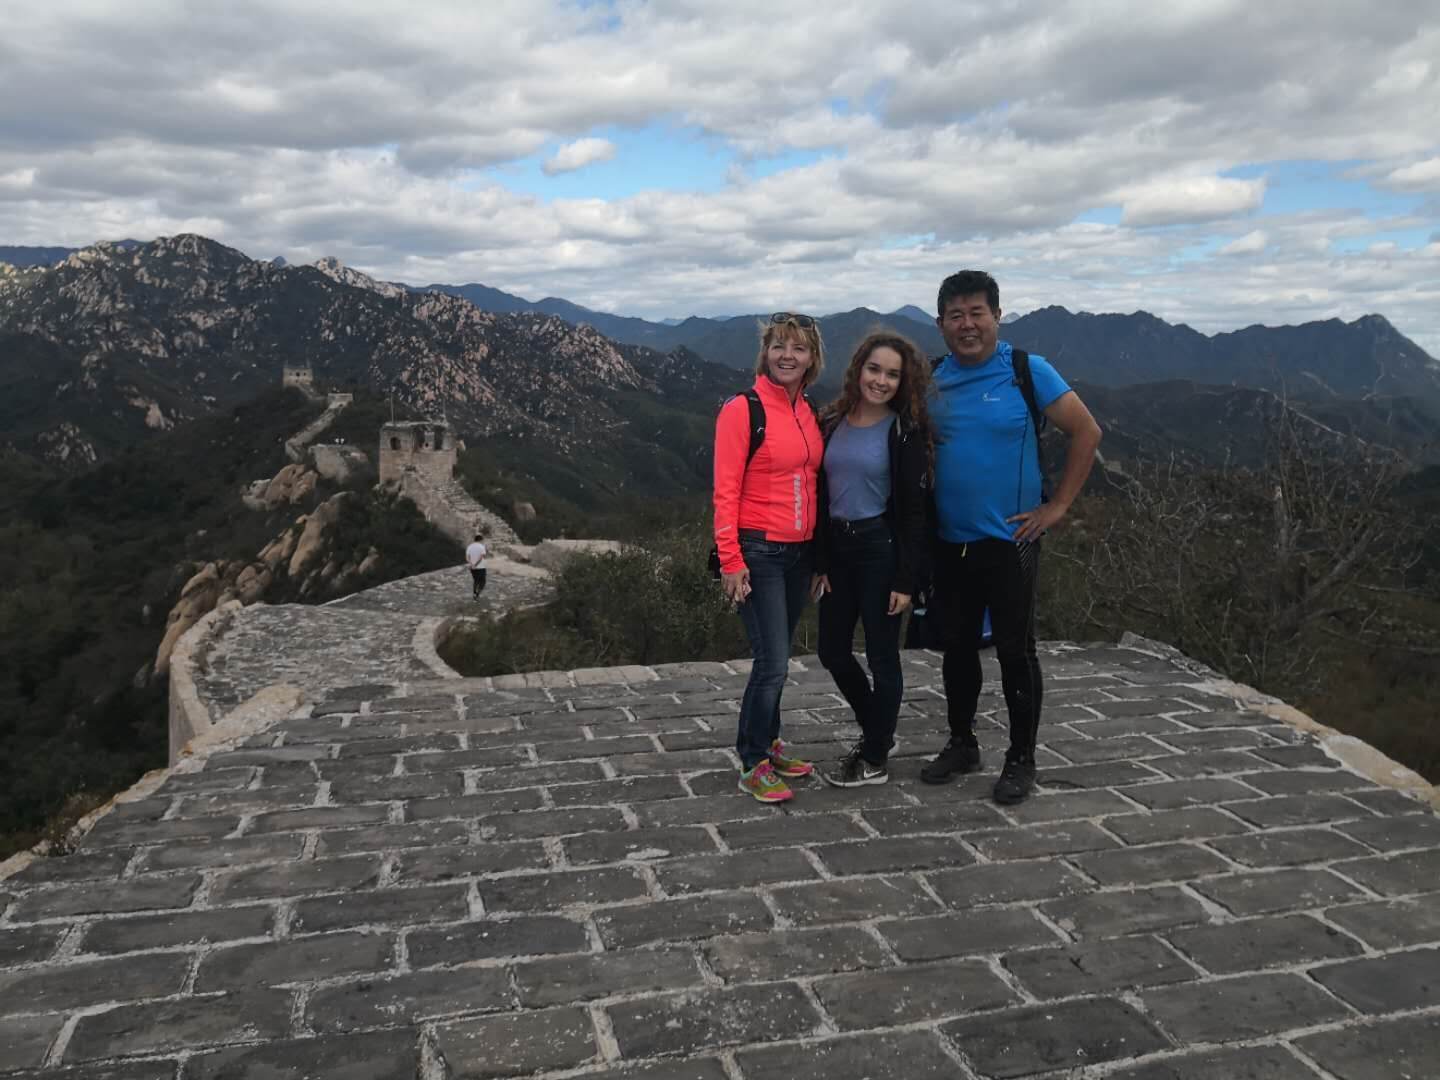 On the Great Wall